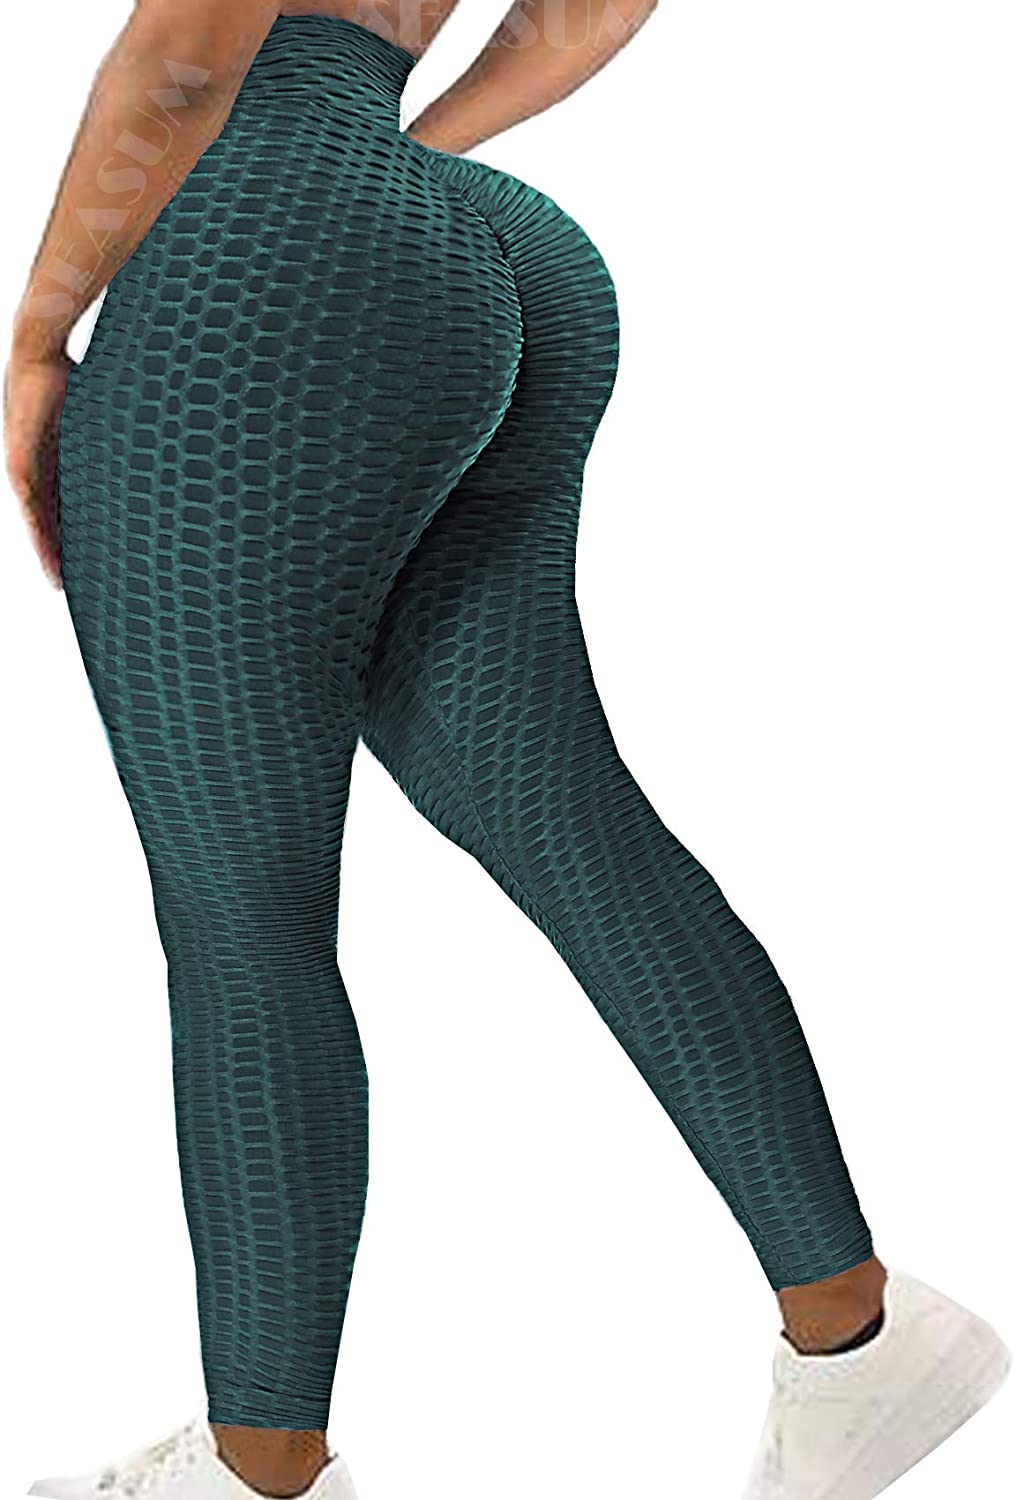 NORMOV Women's Non See-Through Butt Lifting Honeycomb Yoga Pants High  Waisted Textured Running Tights Workout Leggings